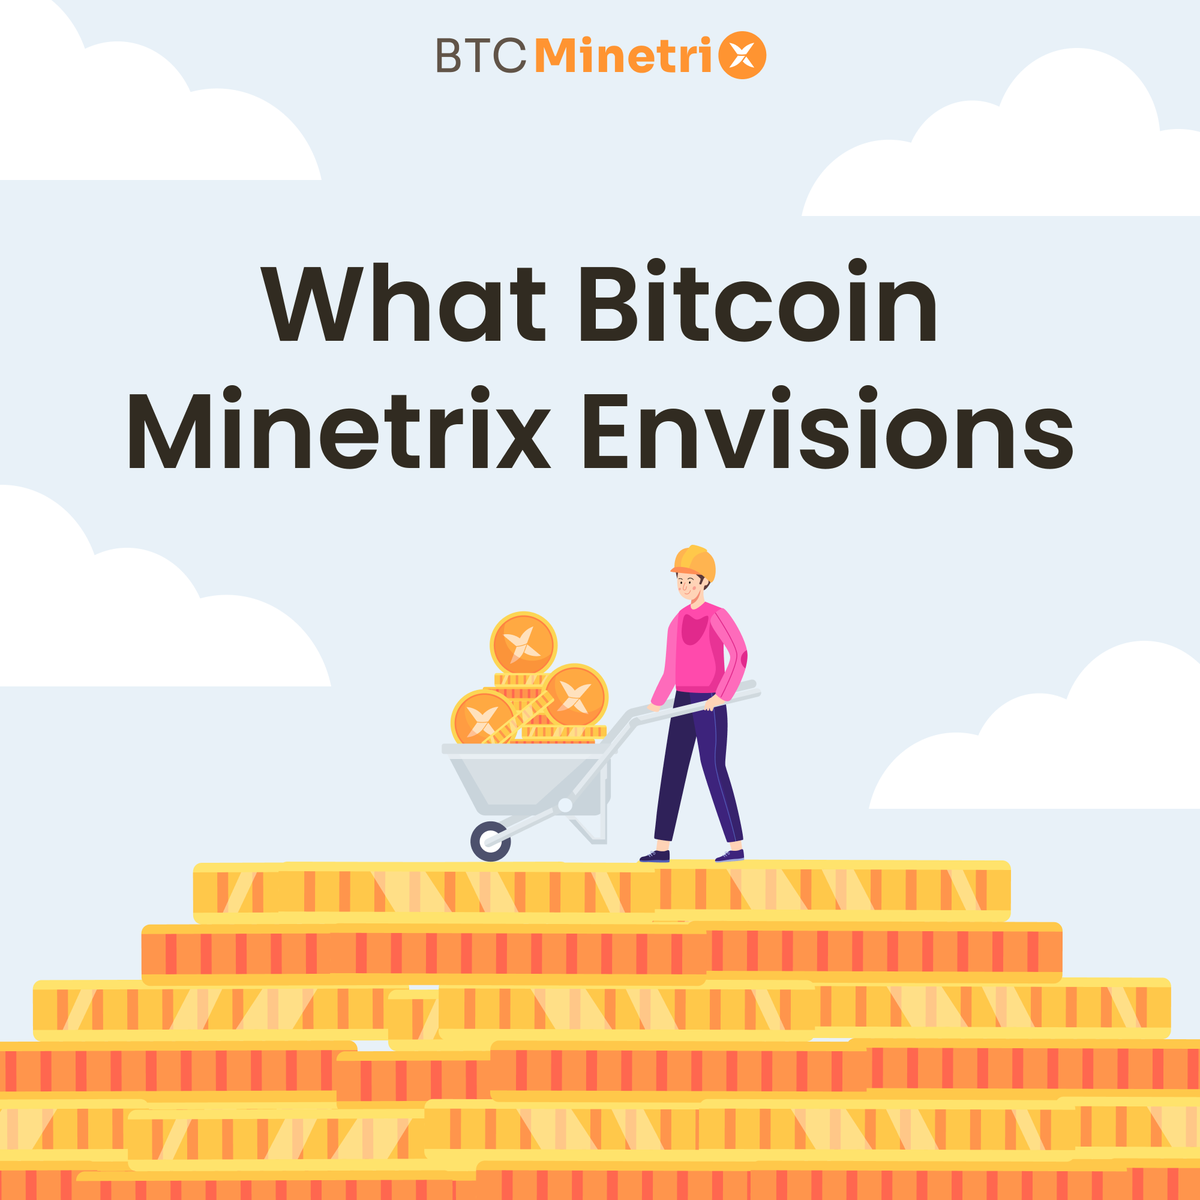 What #BitcoinMinetrix envisions: 🔎 Simple entry points for newcomers. 💰 Budget-friendly mining choices. 💻 Stylish and noiseless setups. 🔐 Confidence without concerns about reselling.